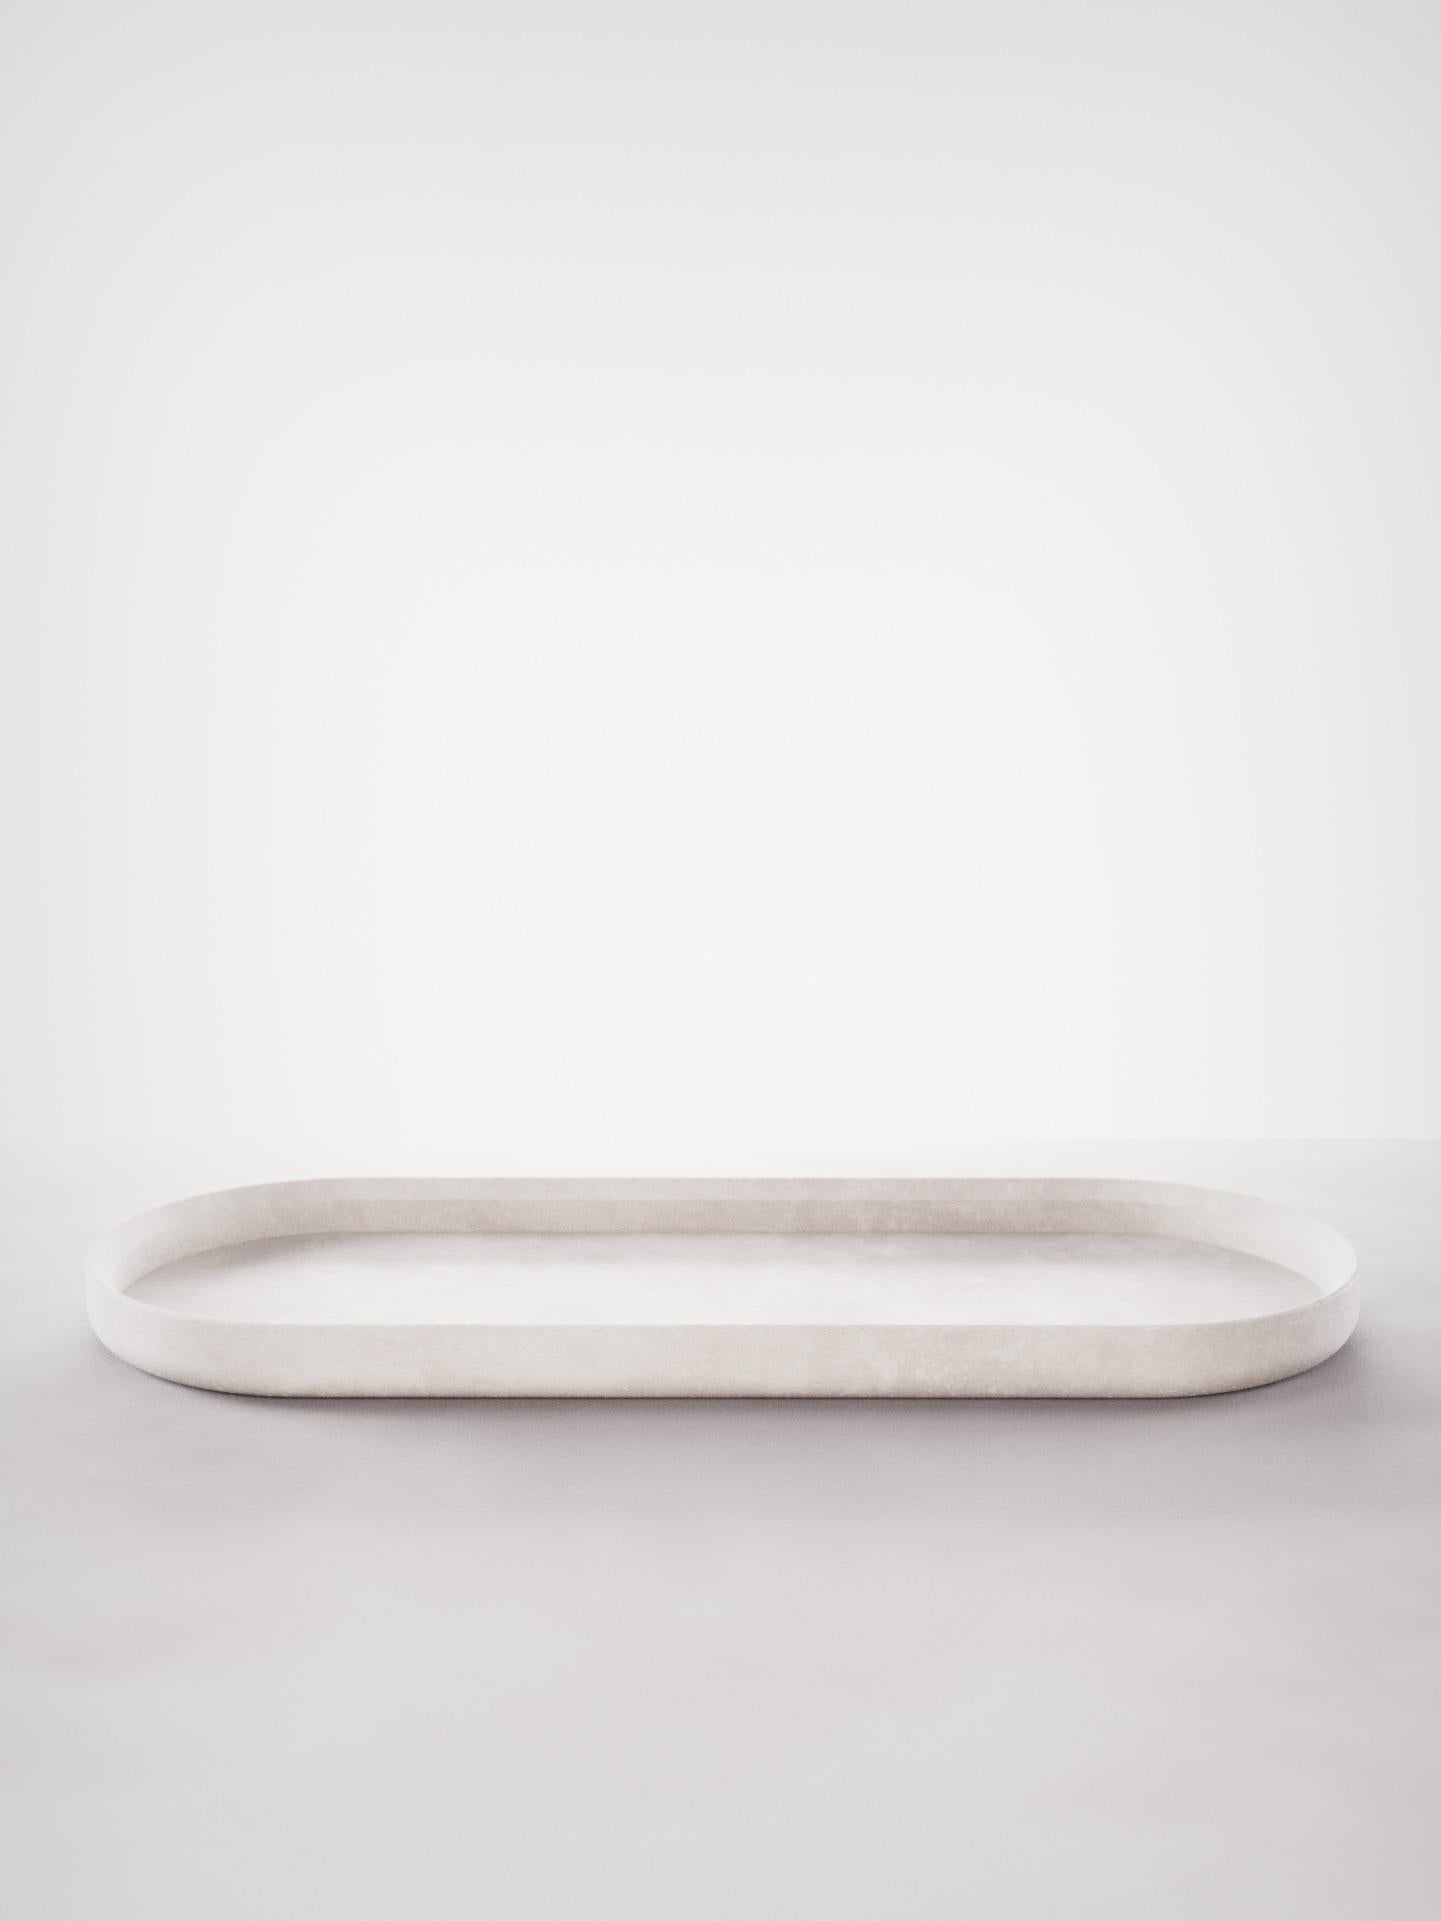 Modern Renzo Set Concrete Tray Made In Italy White&Light Blue Cement Christmas Edition For Sale